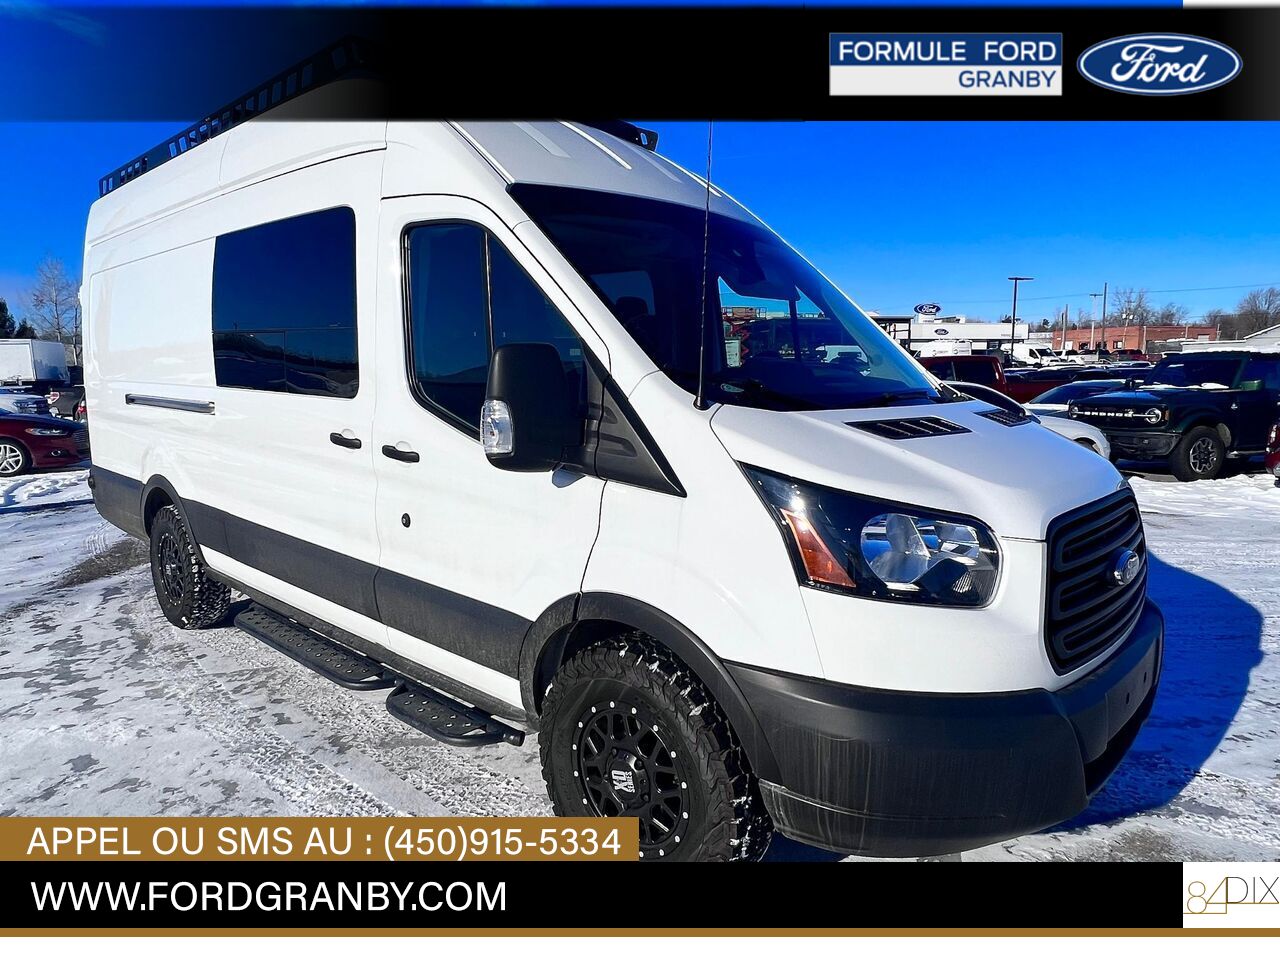 2019 Ford Transit fourgon utilitaire Granby - photo #0